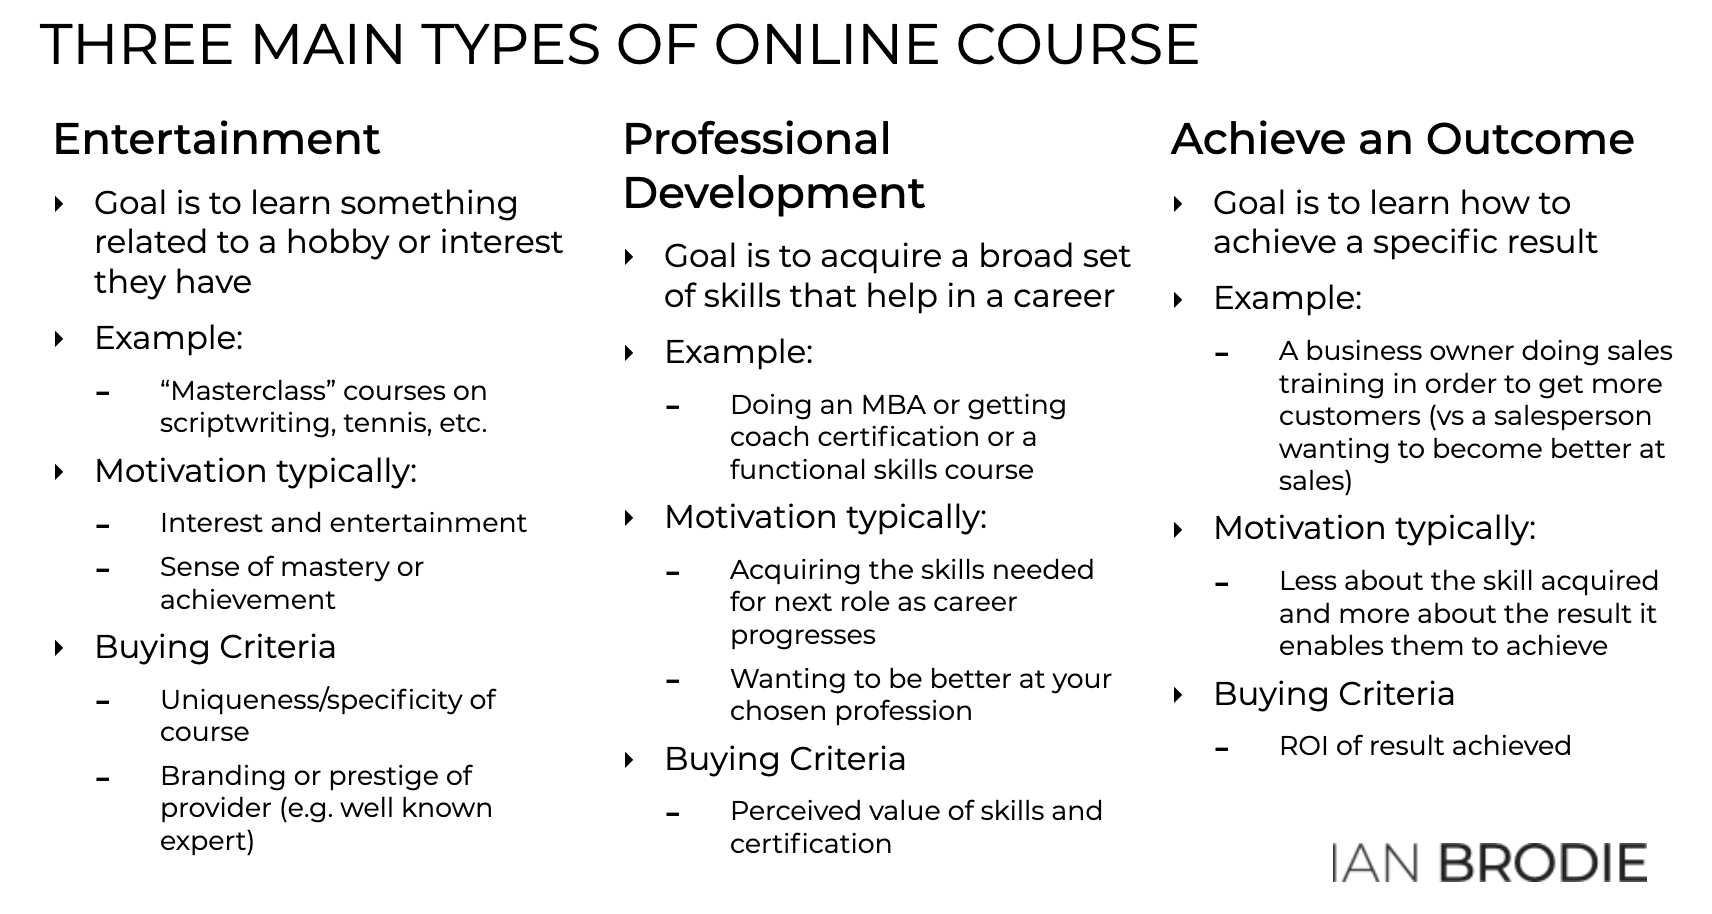 Comparison of the 3 main types of online course